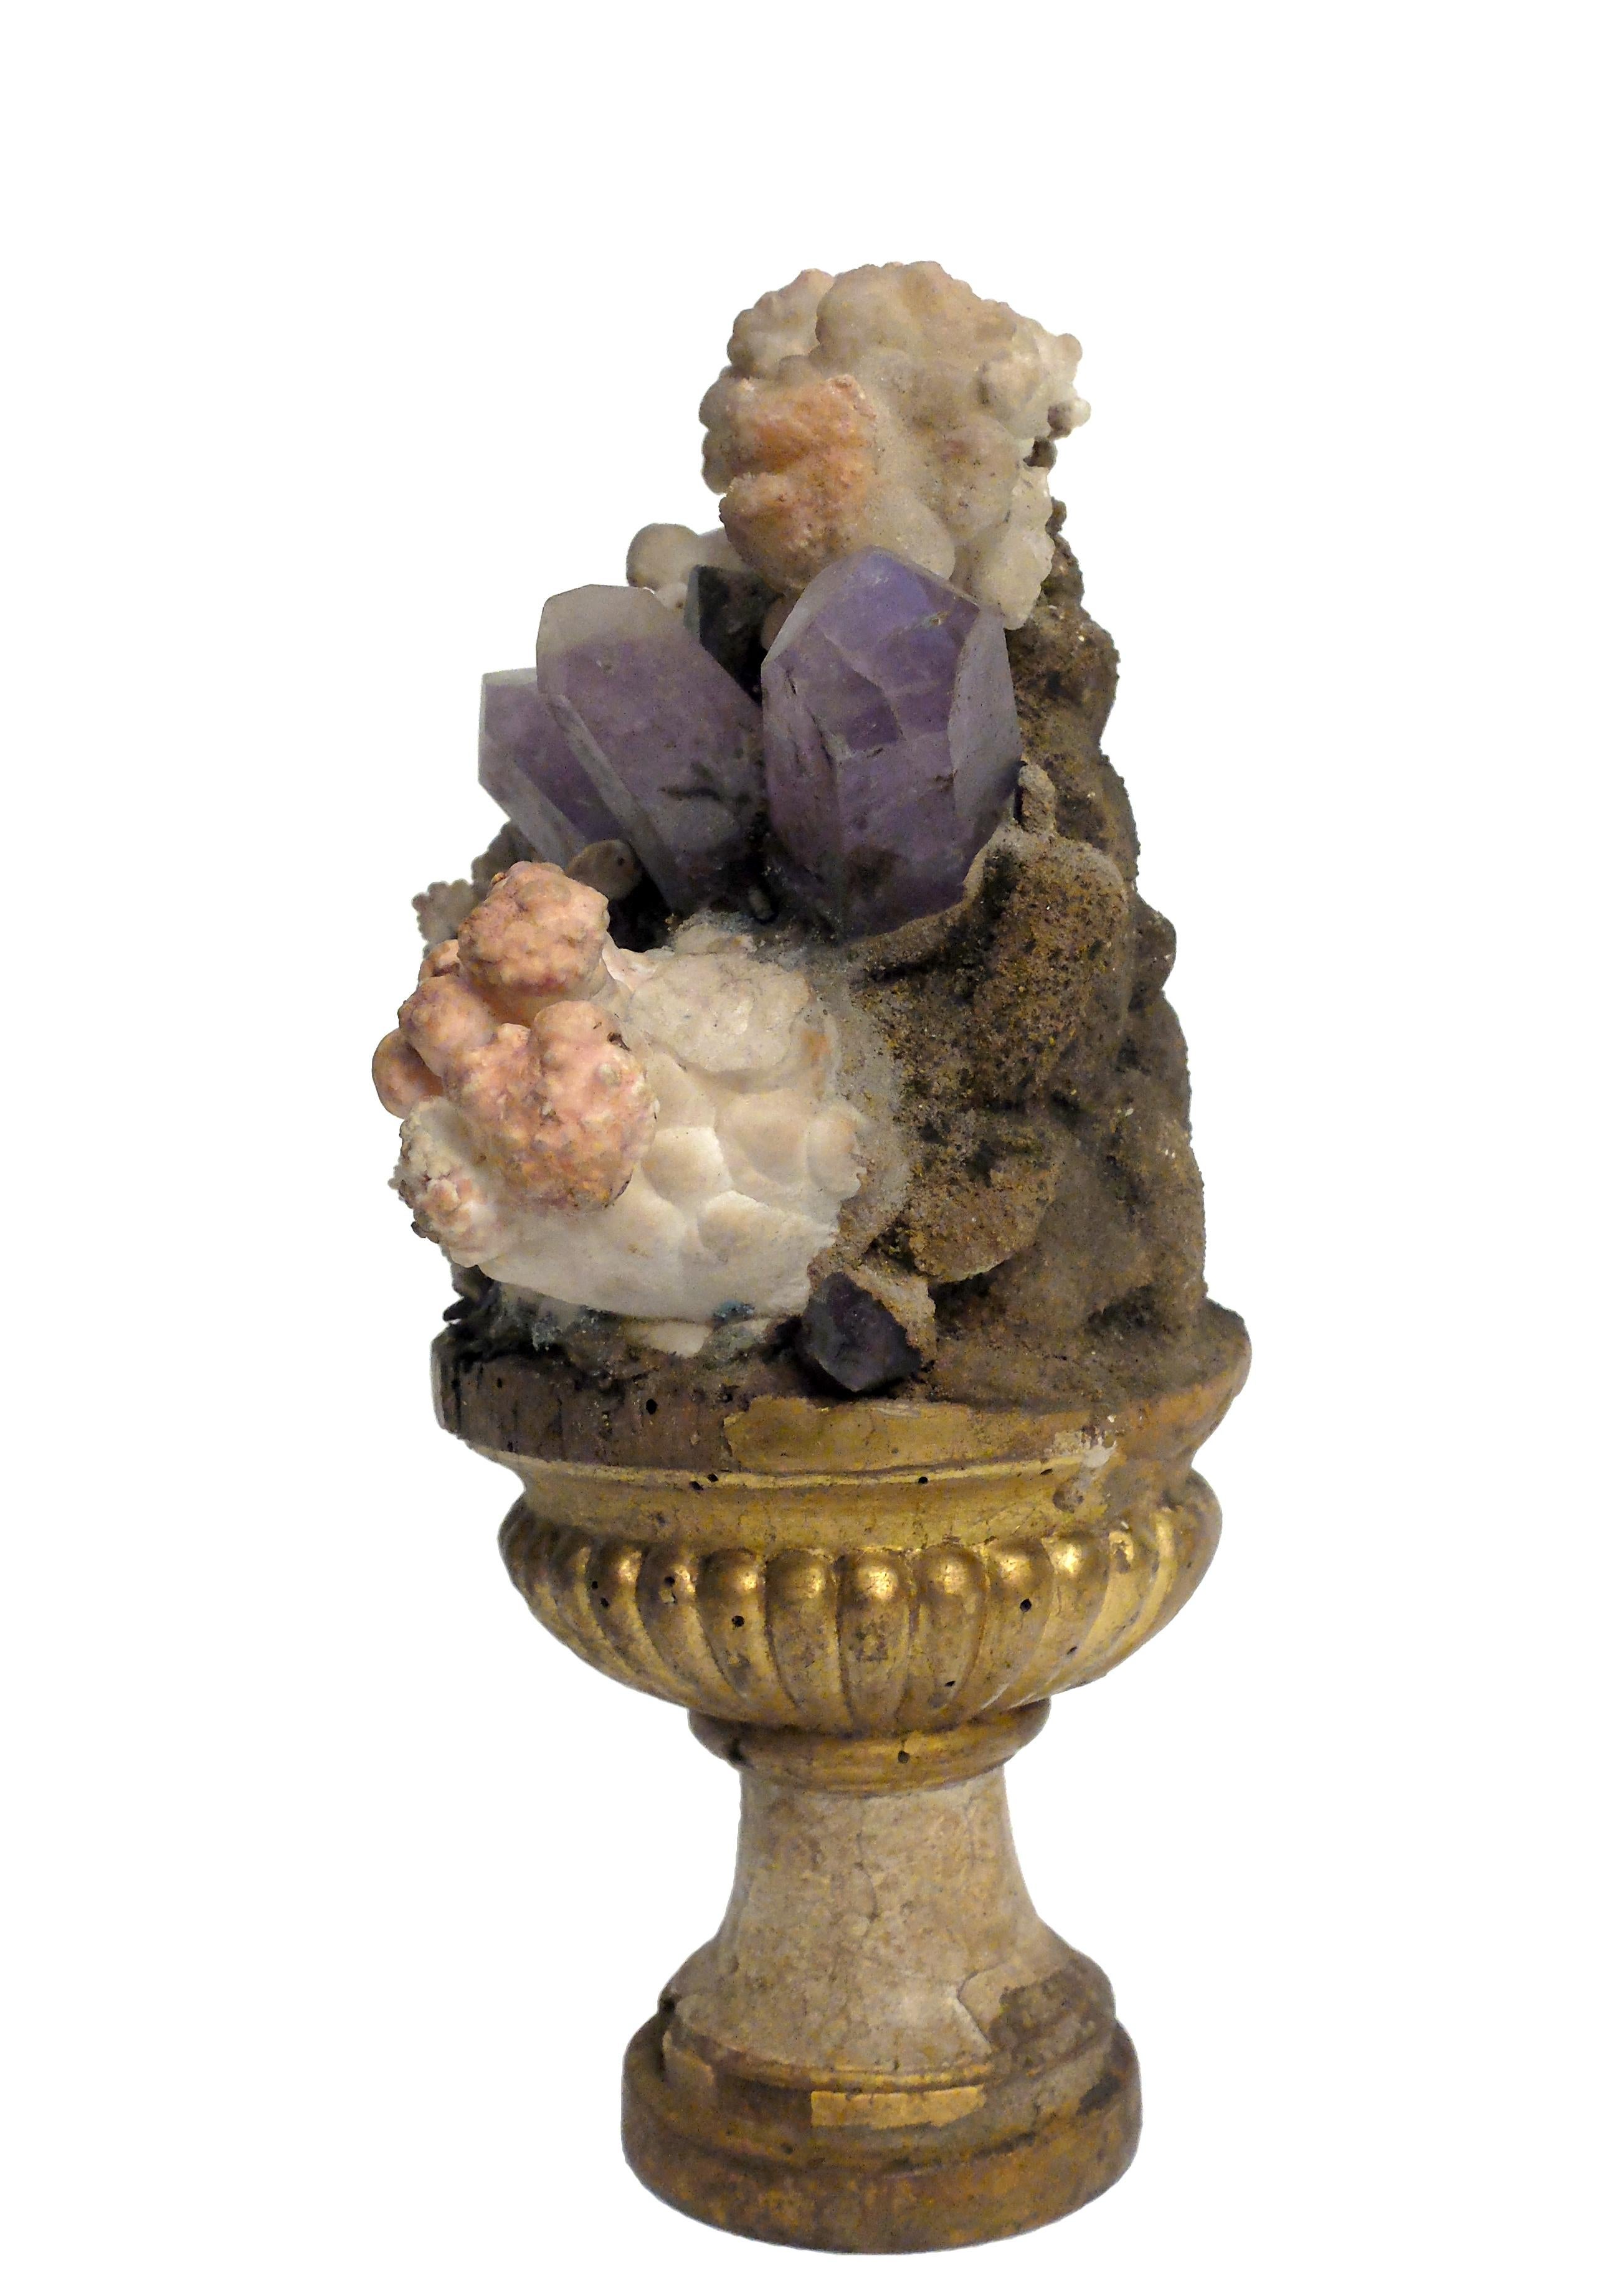 A naturalia mineral specimen: A composition of amethiste and calcite flowers crystals druze, mounted over guild-plated wooden base on a vase shape.